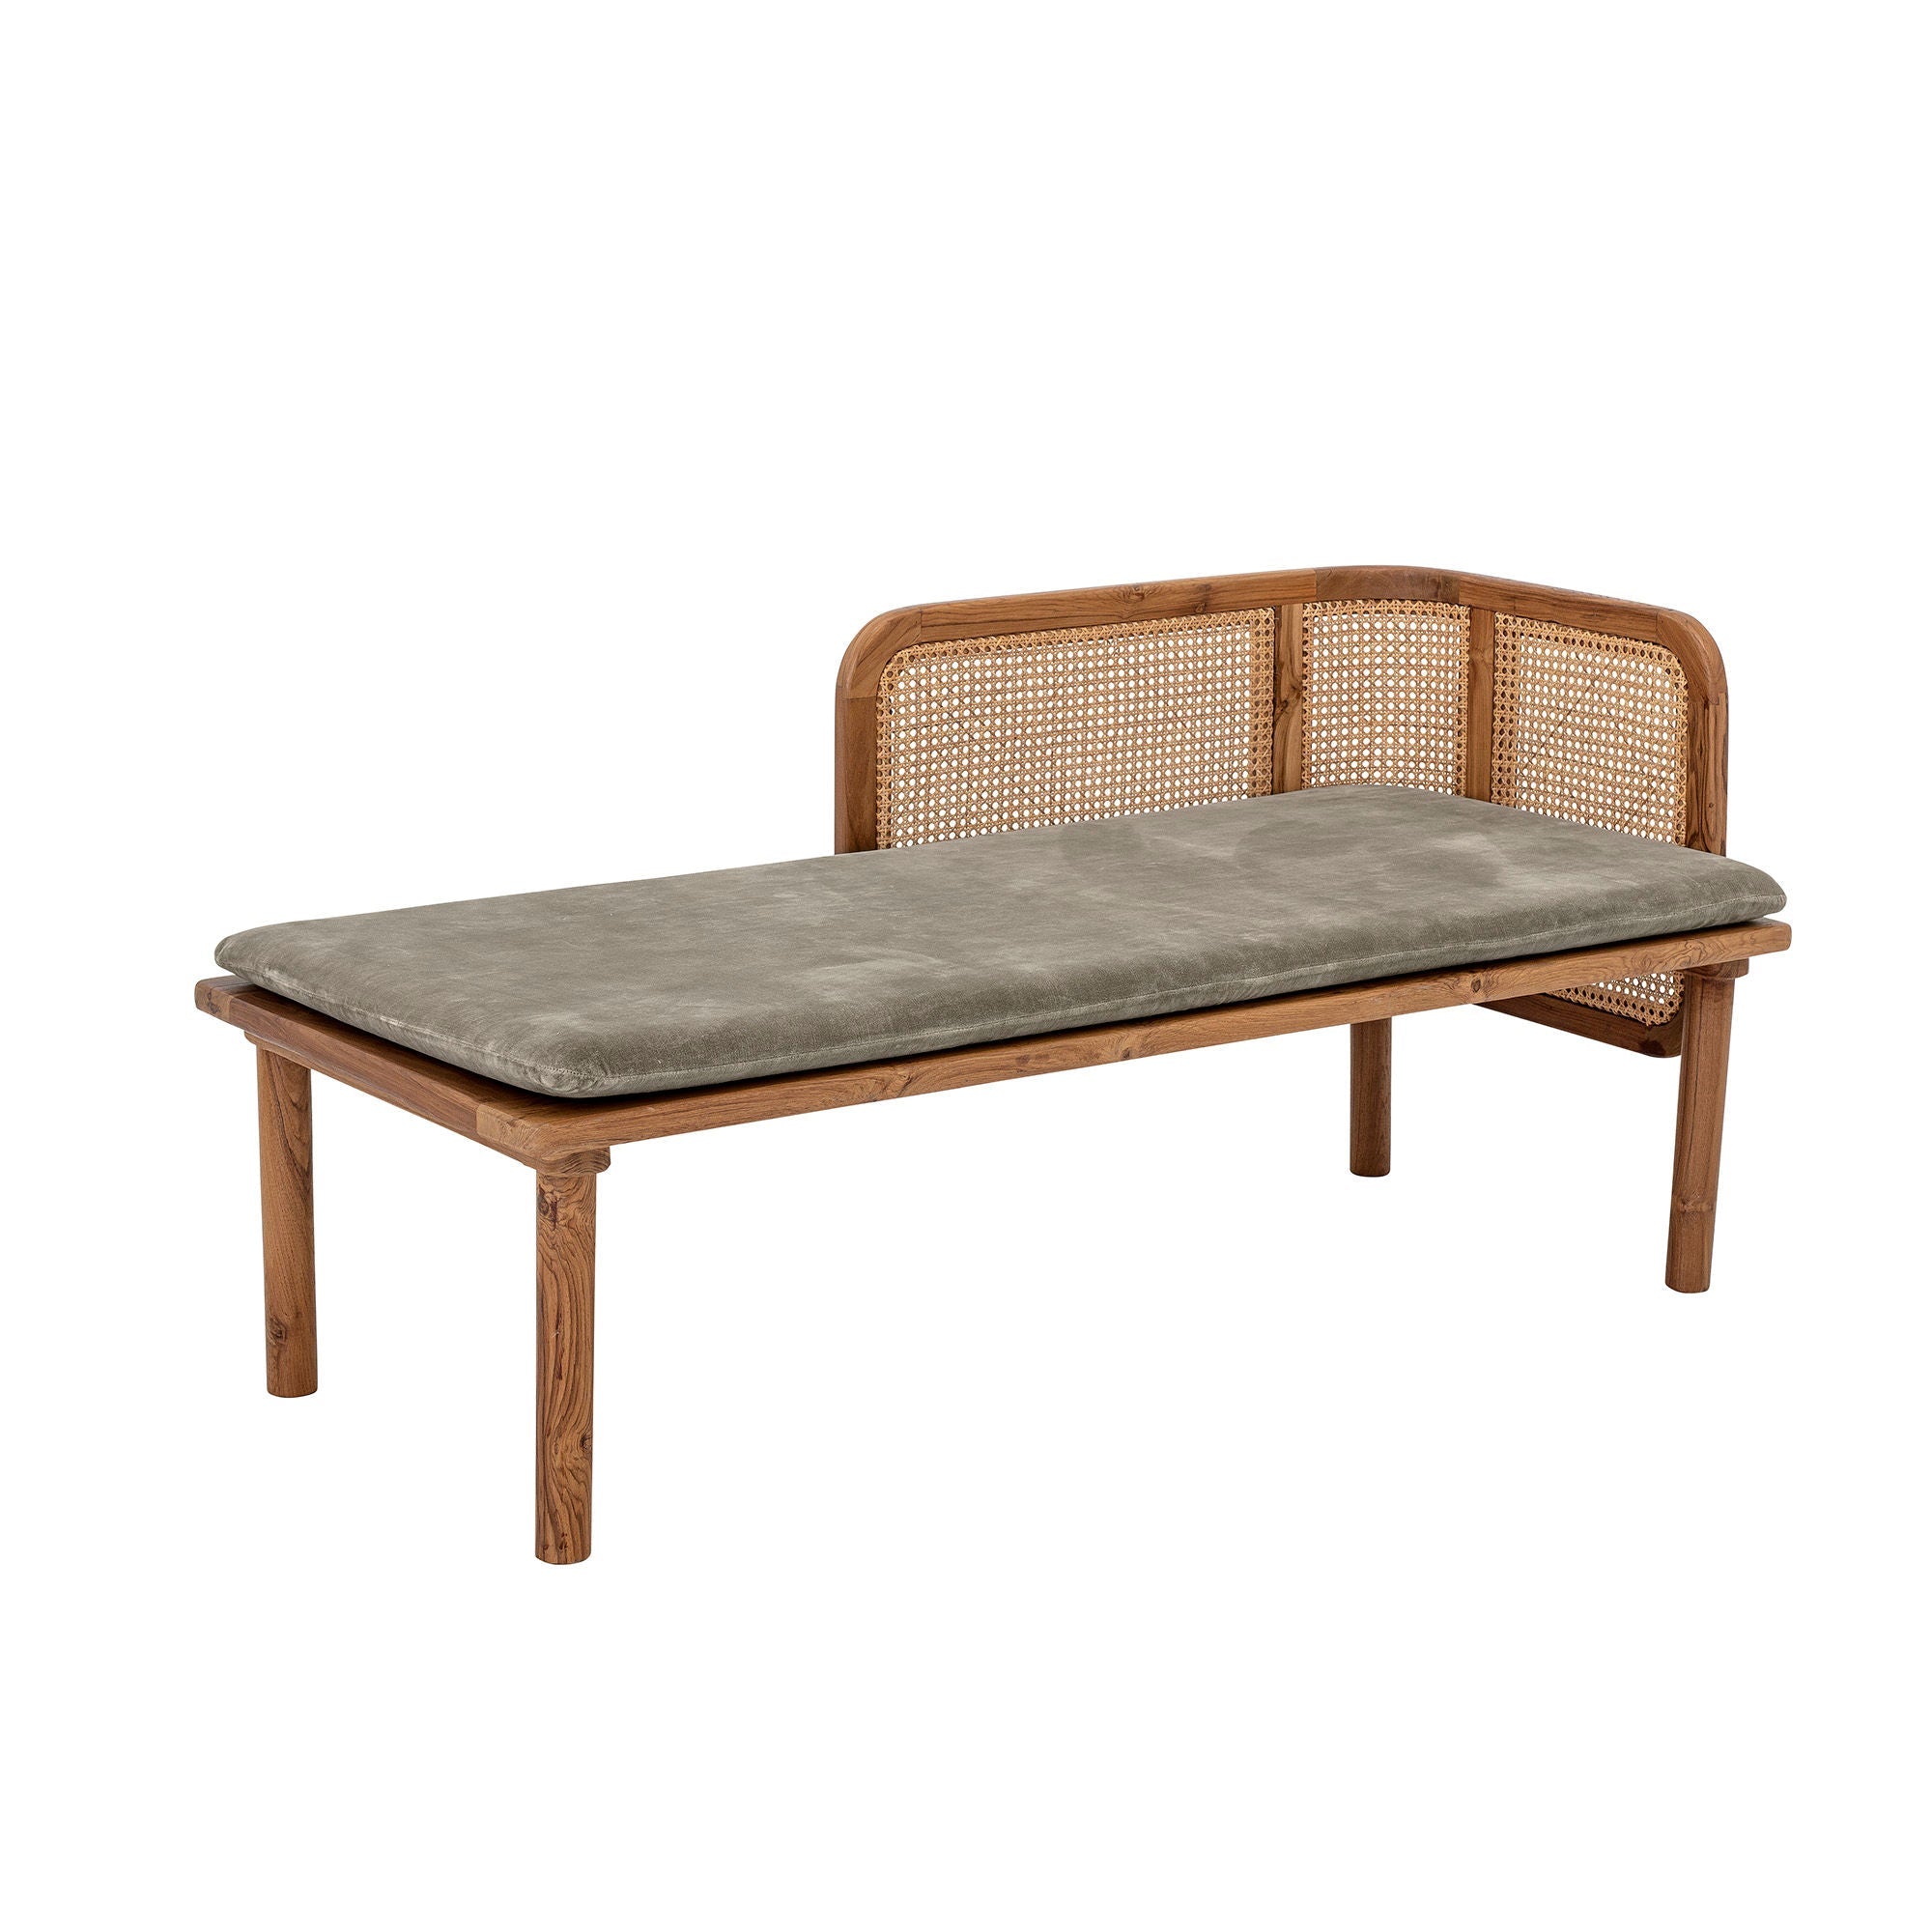 Creative Collection Felucca Daybed, Green, Teak